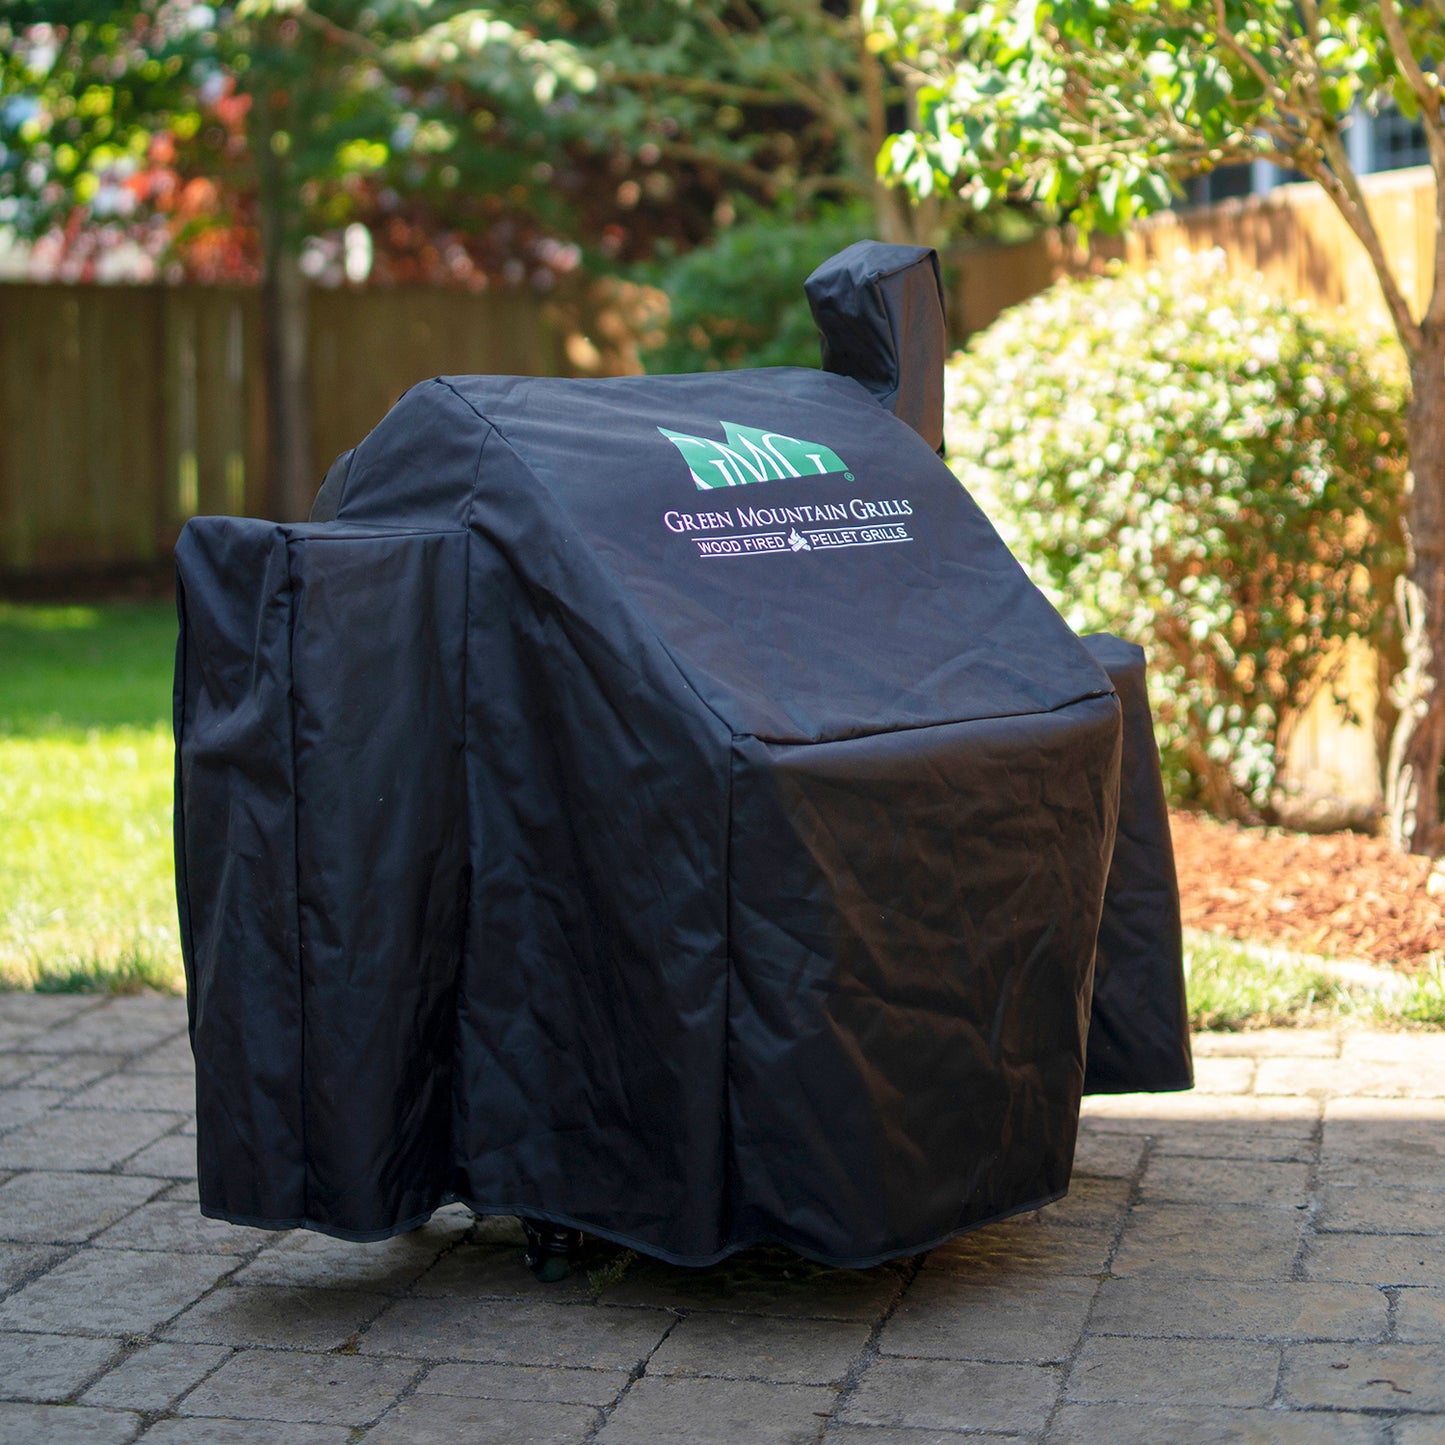 Green Mountain Grills Ledge Prime Grill Cover